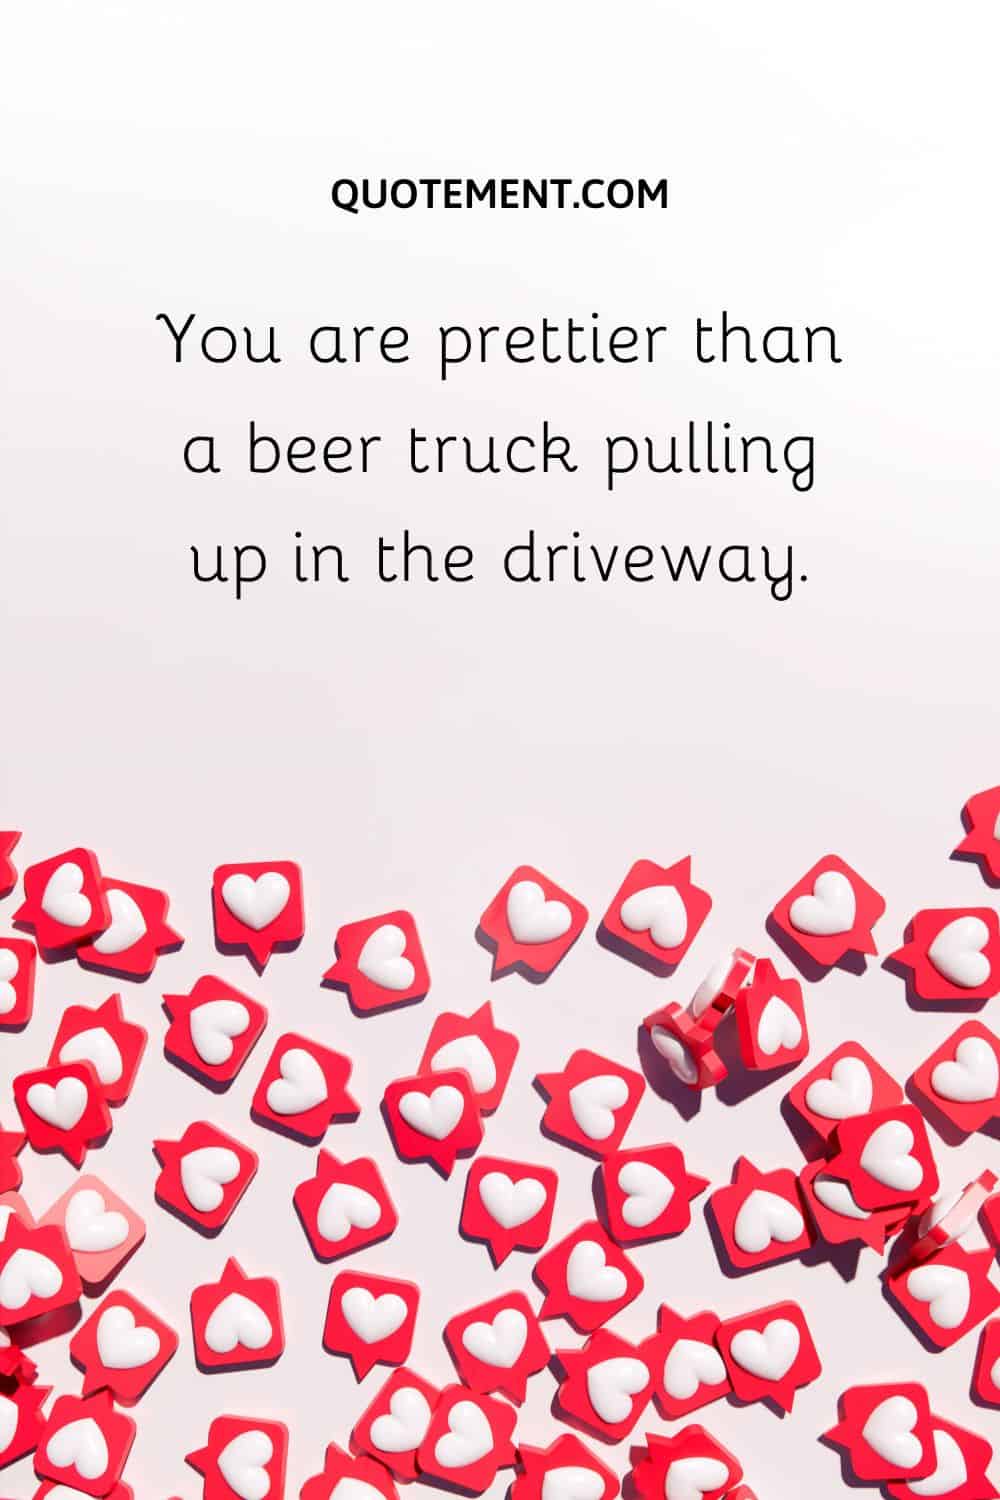 You are prettier than a beer truck